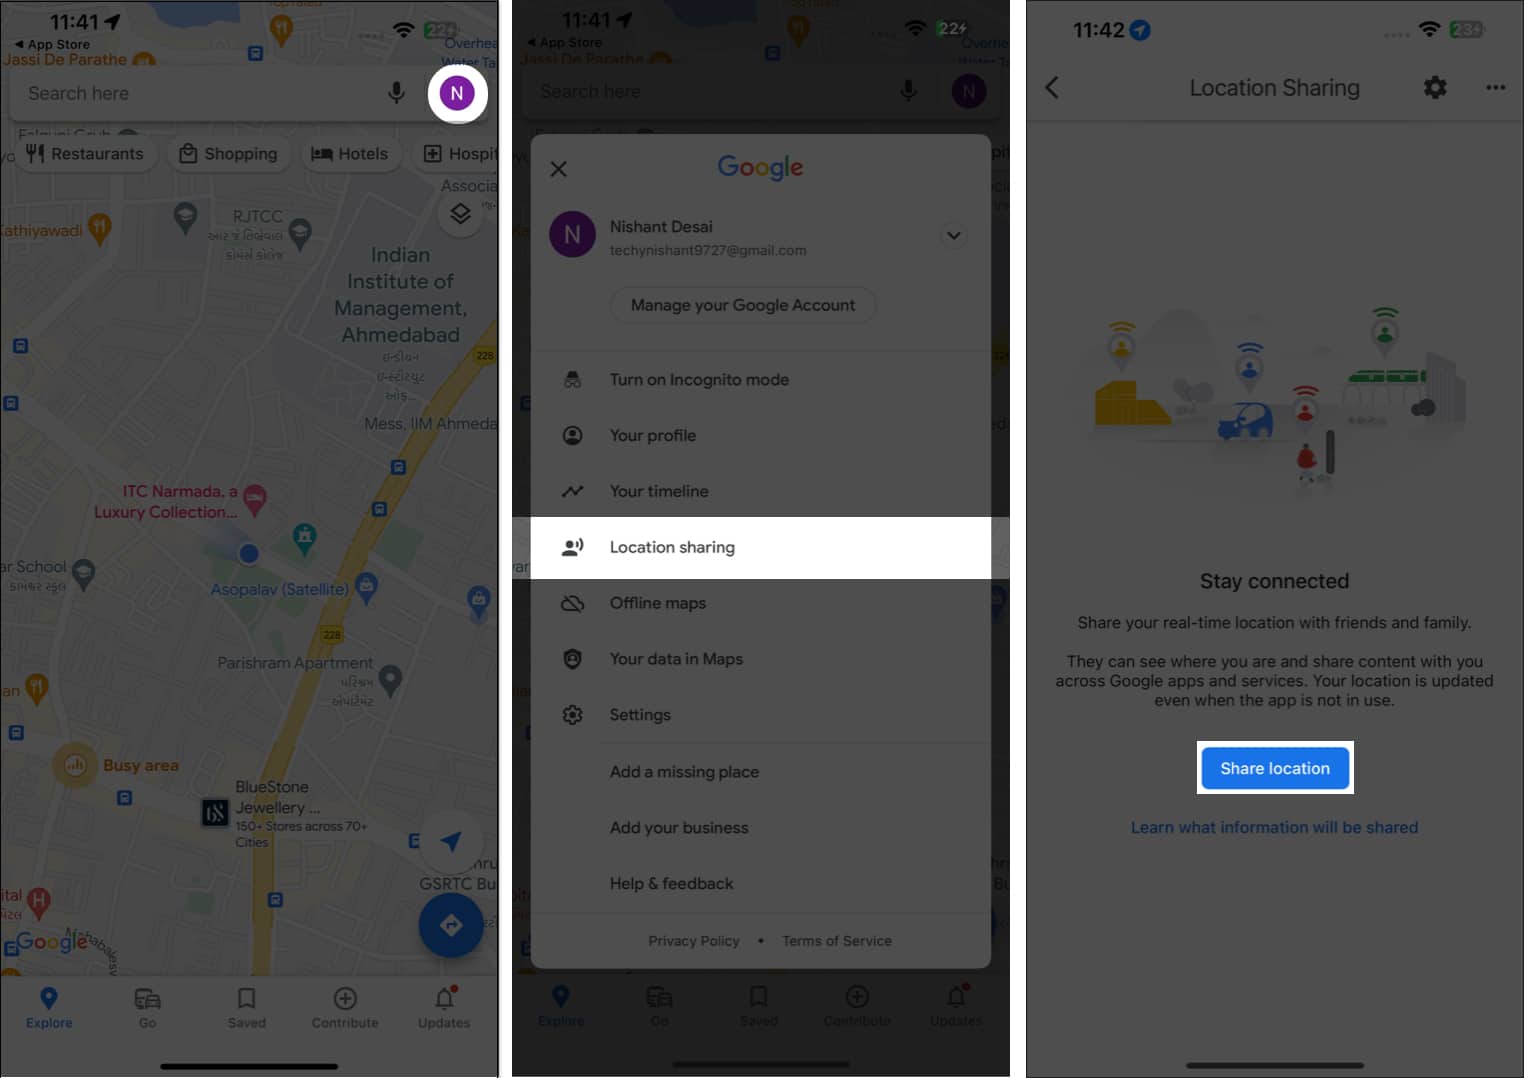 Tap on your profile, location sharing, share location in google maps